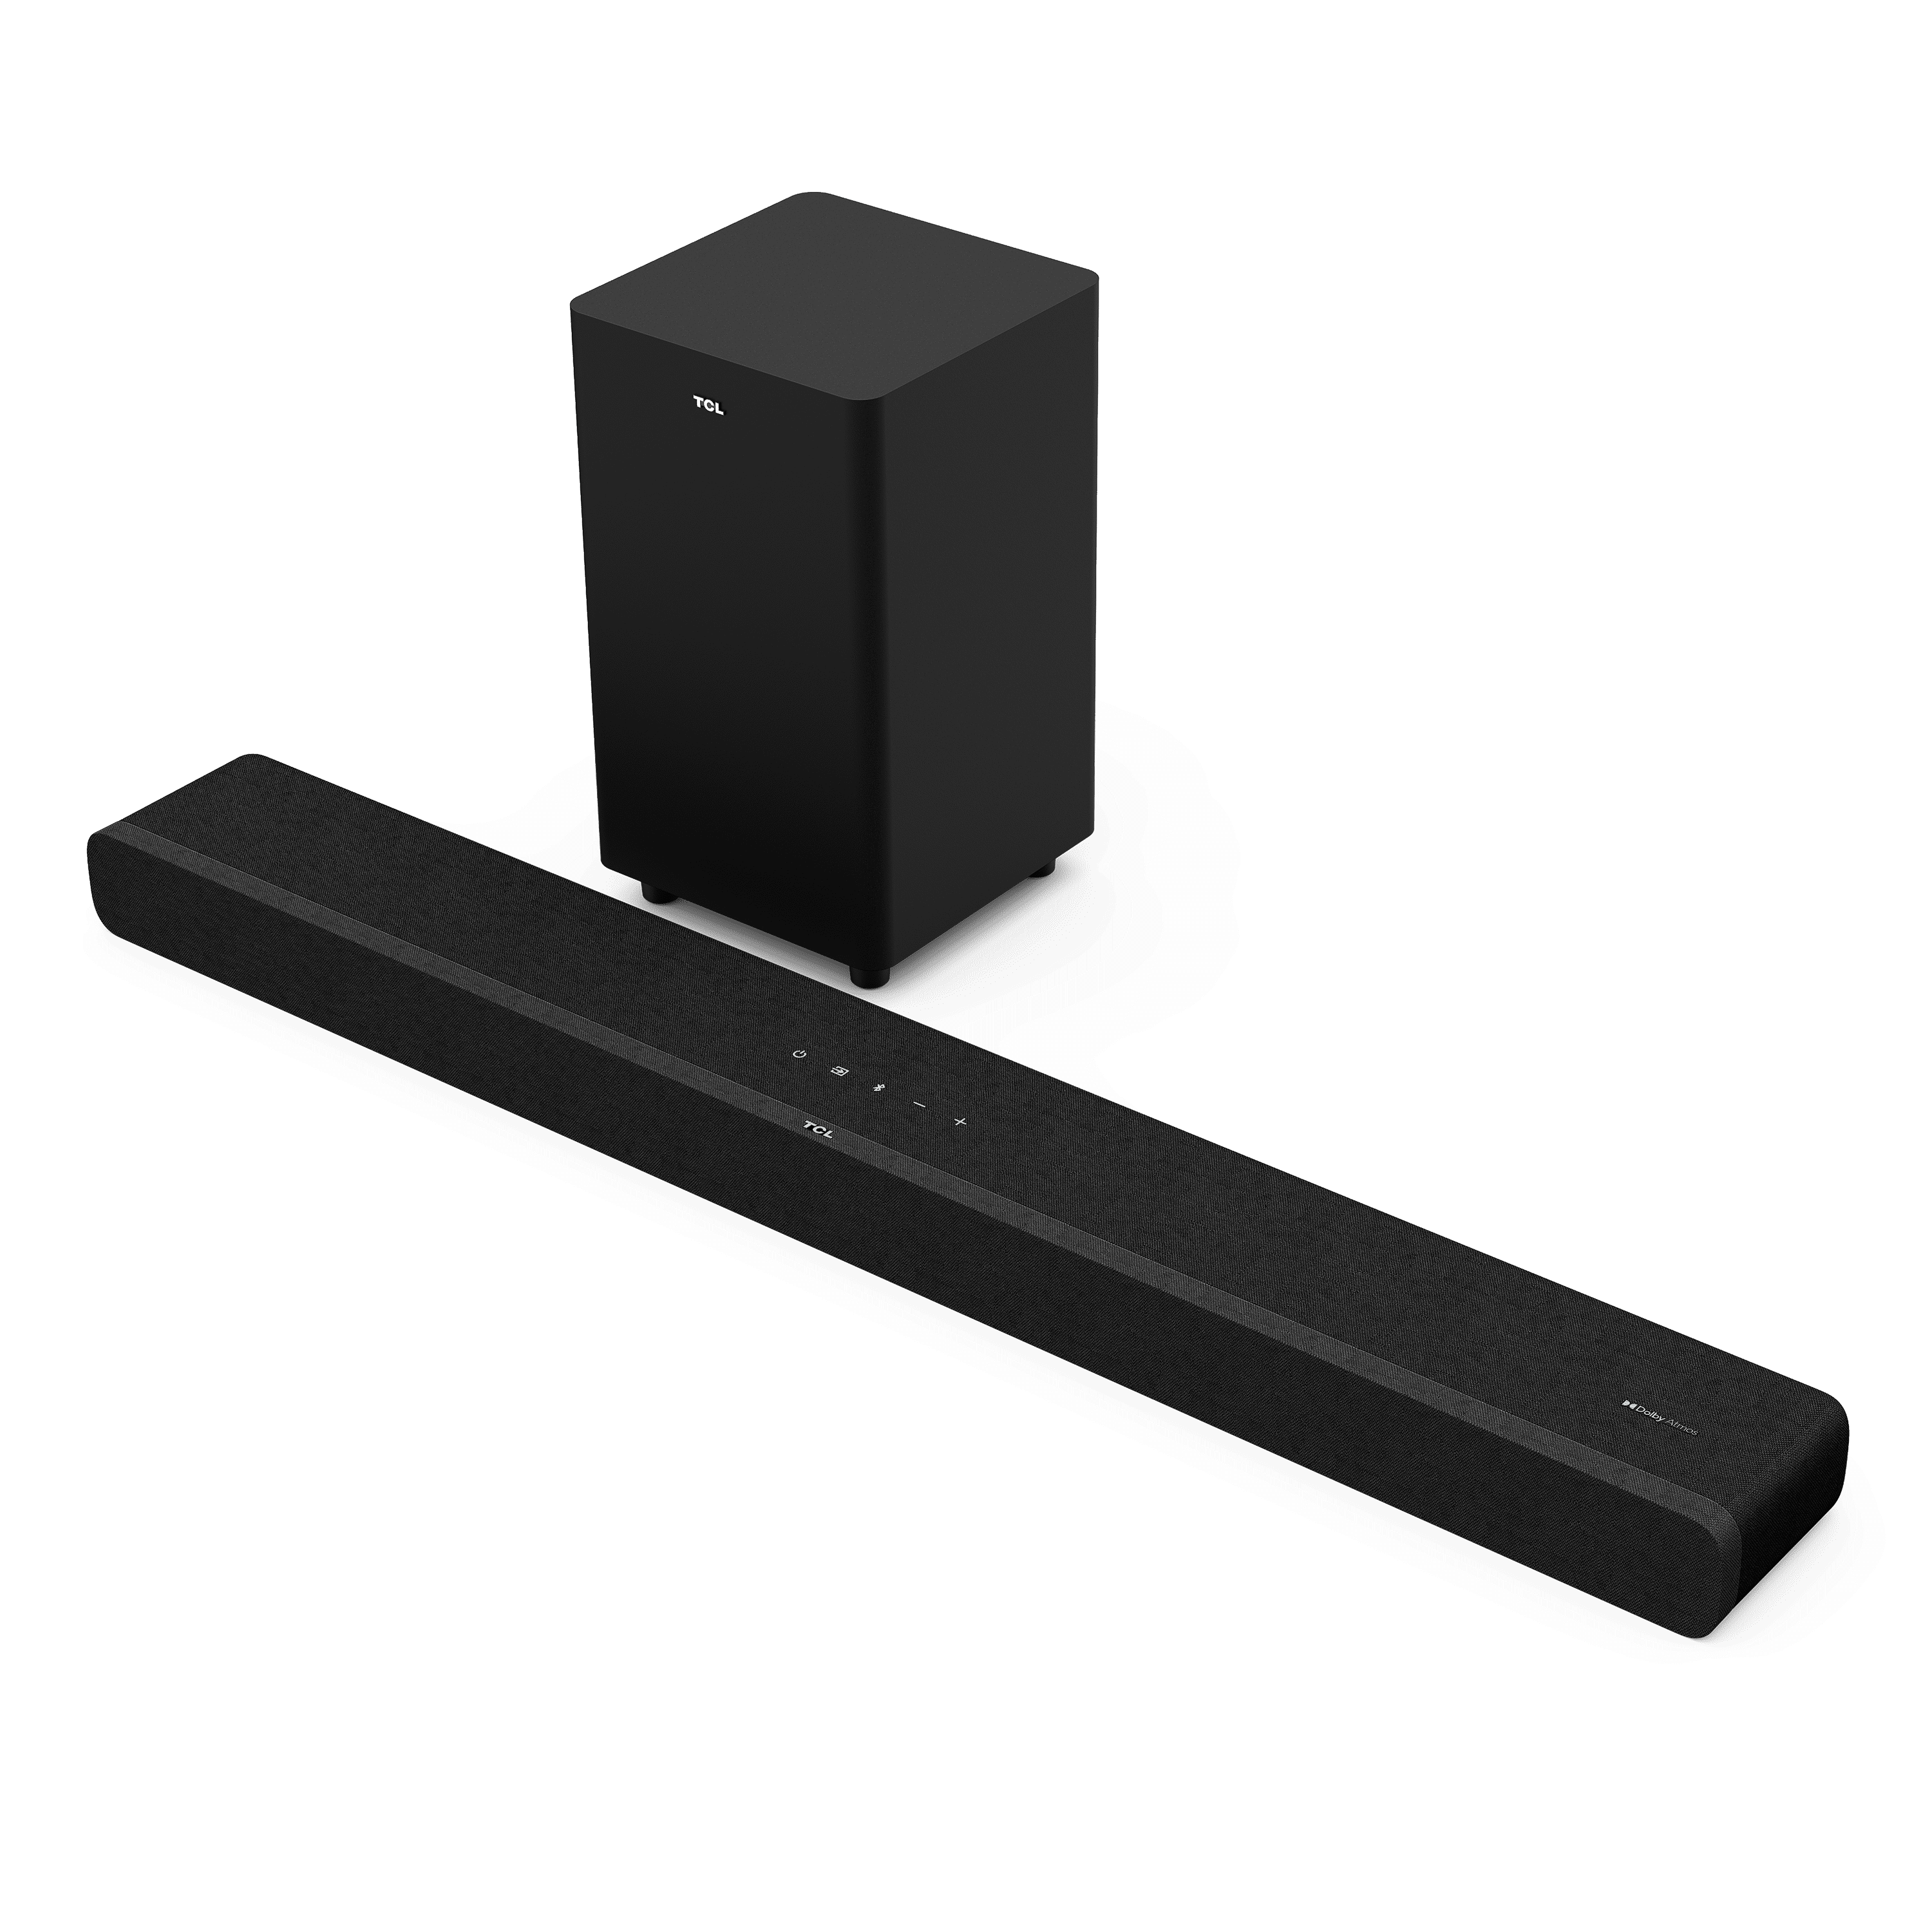 TCL Alto 8+ Dolby Atmos 3.1.2 Channel Sound bar with wireless Subwoofer, TS813 $99.00